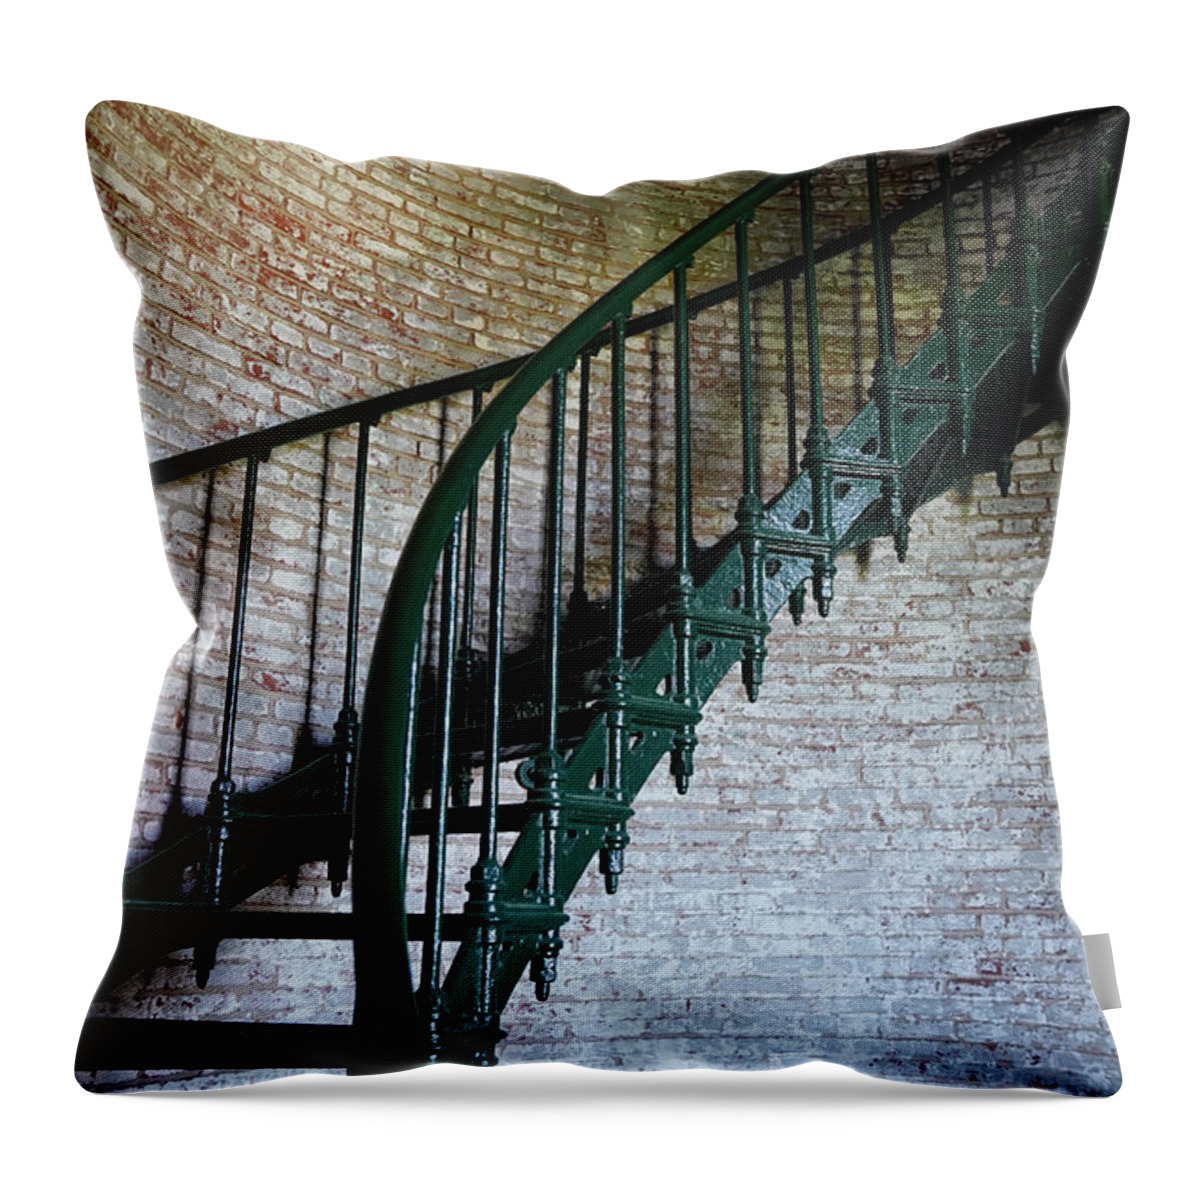  Throw Pillow featuring the photograph OBX by Annamaria Frost